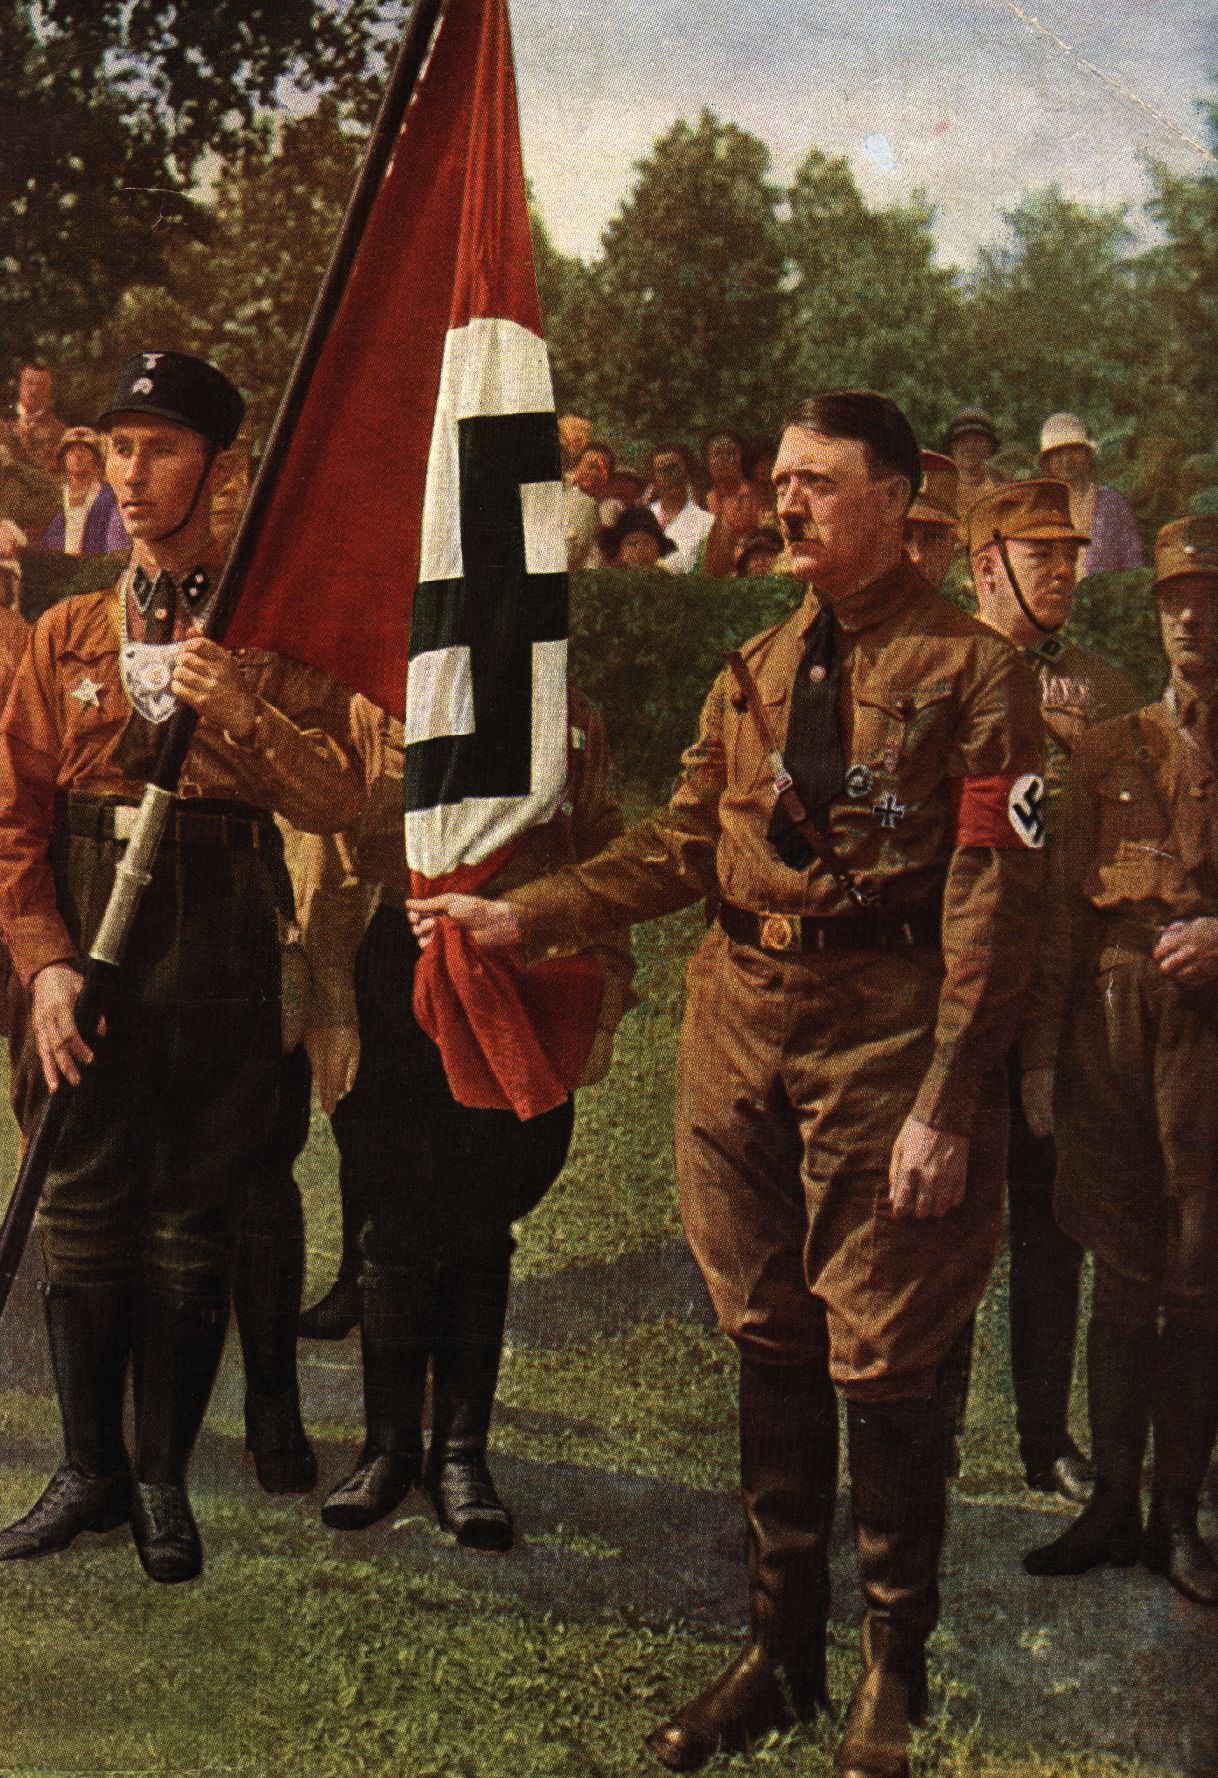 Adolf Hitler holds the “Bloodied Standard” of the Nazi party at a memorial ceremony for the failed uprising of 9th November 1923